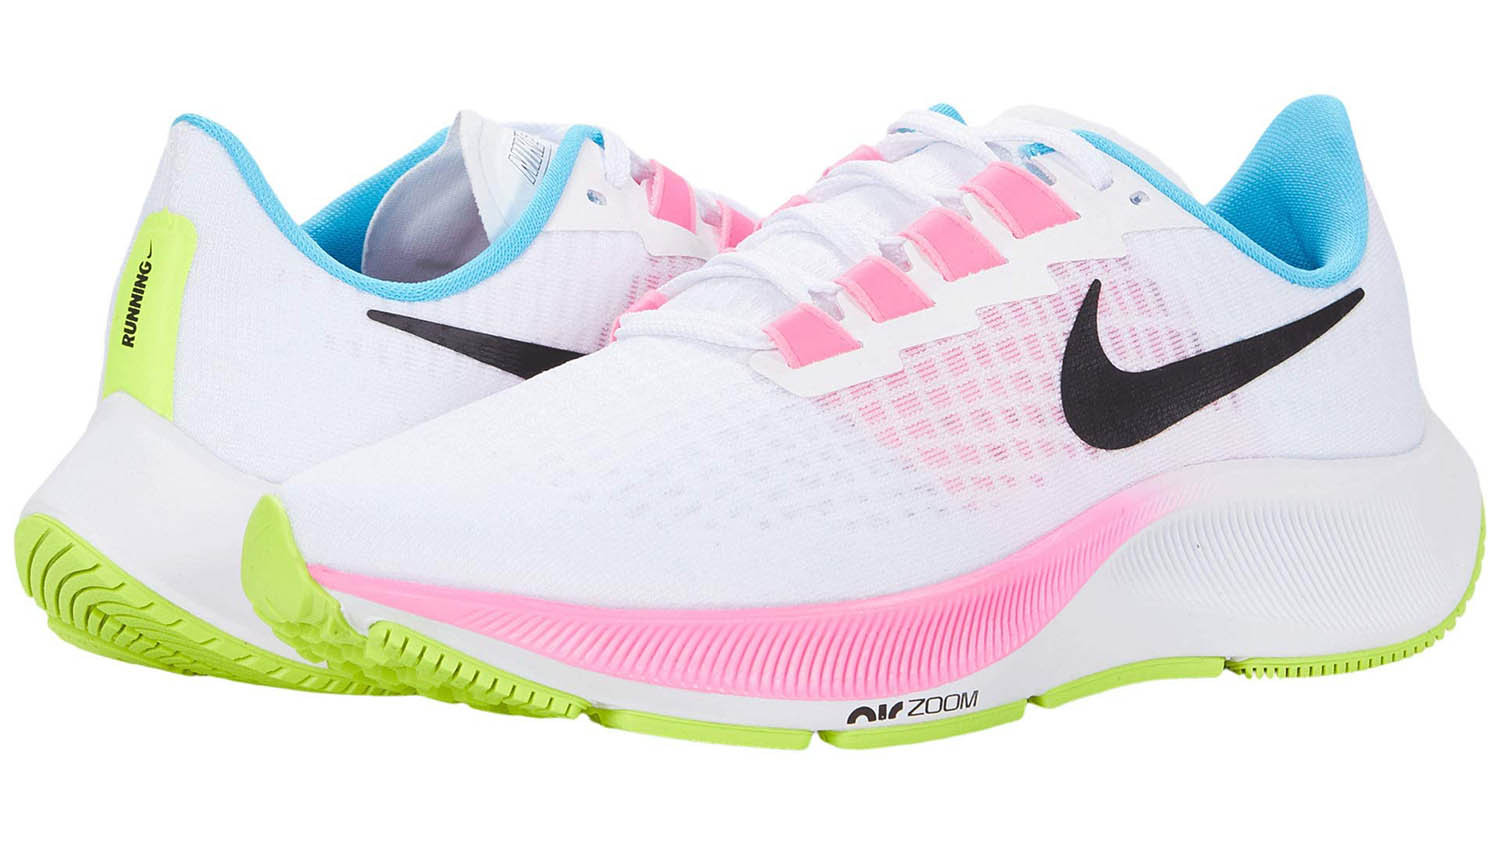 The Best Running Shoes for Women Over 50: Our Top 5 Picks